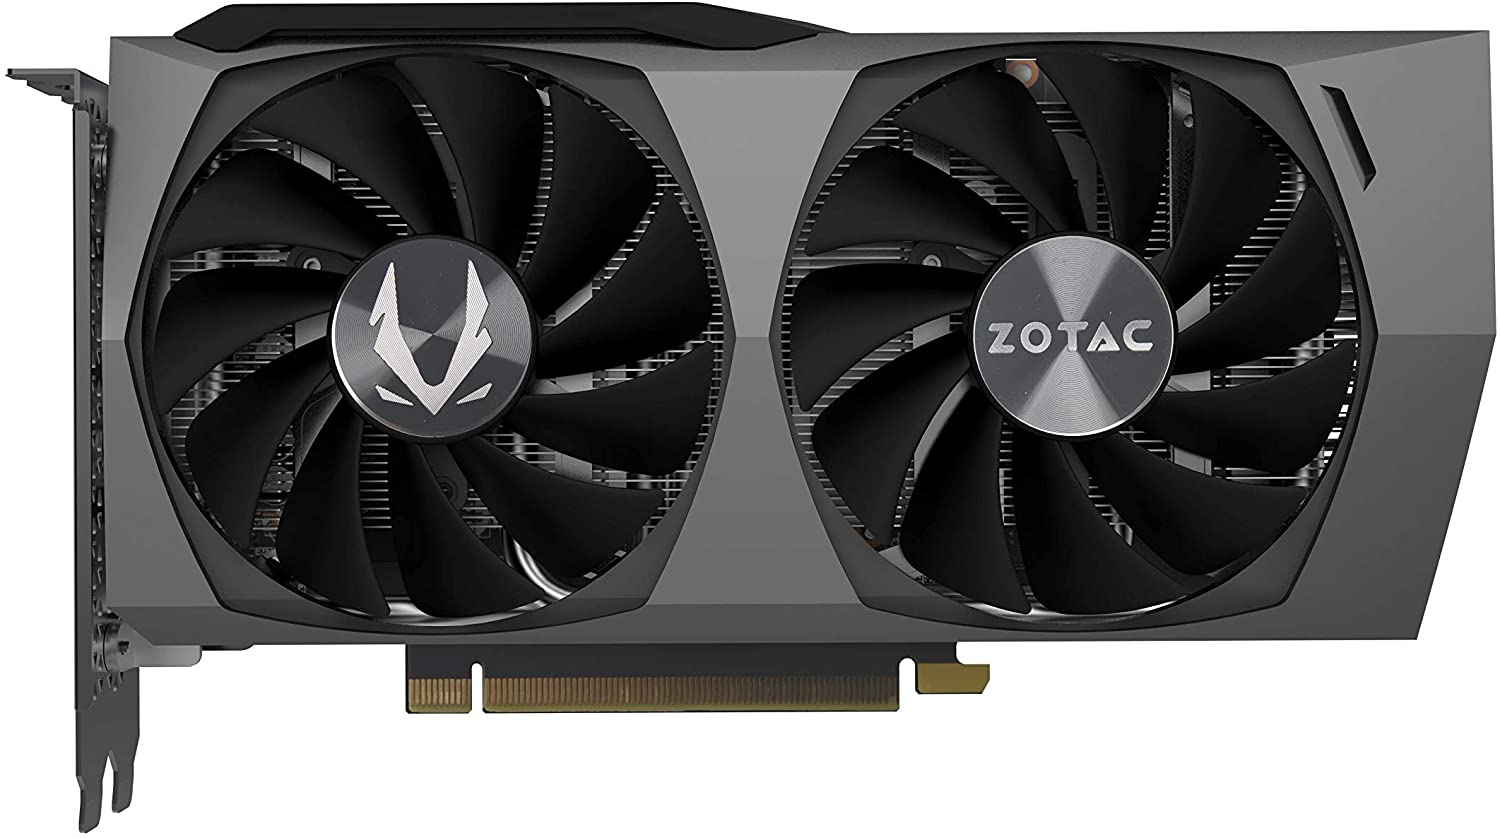 Zotac Gaming GeForce RTX 3060 Twin Edge OC 12GB GDDR6 192-bit 15 Gbps PCIE 4.0 Gaming Graphics Card, IceStorm 2.0 Cooling, Activ-3